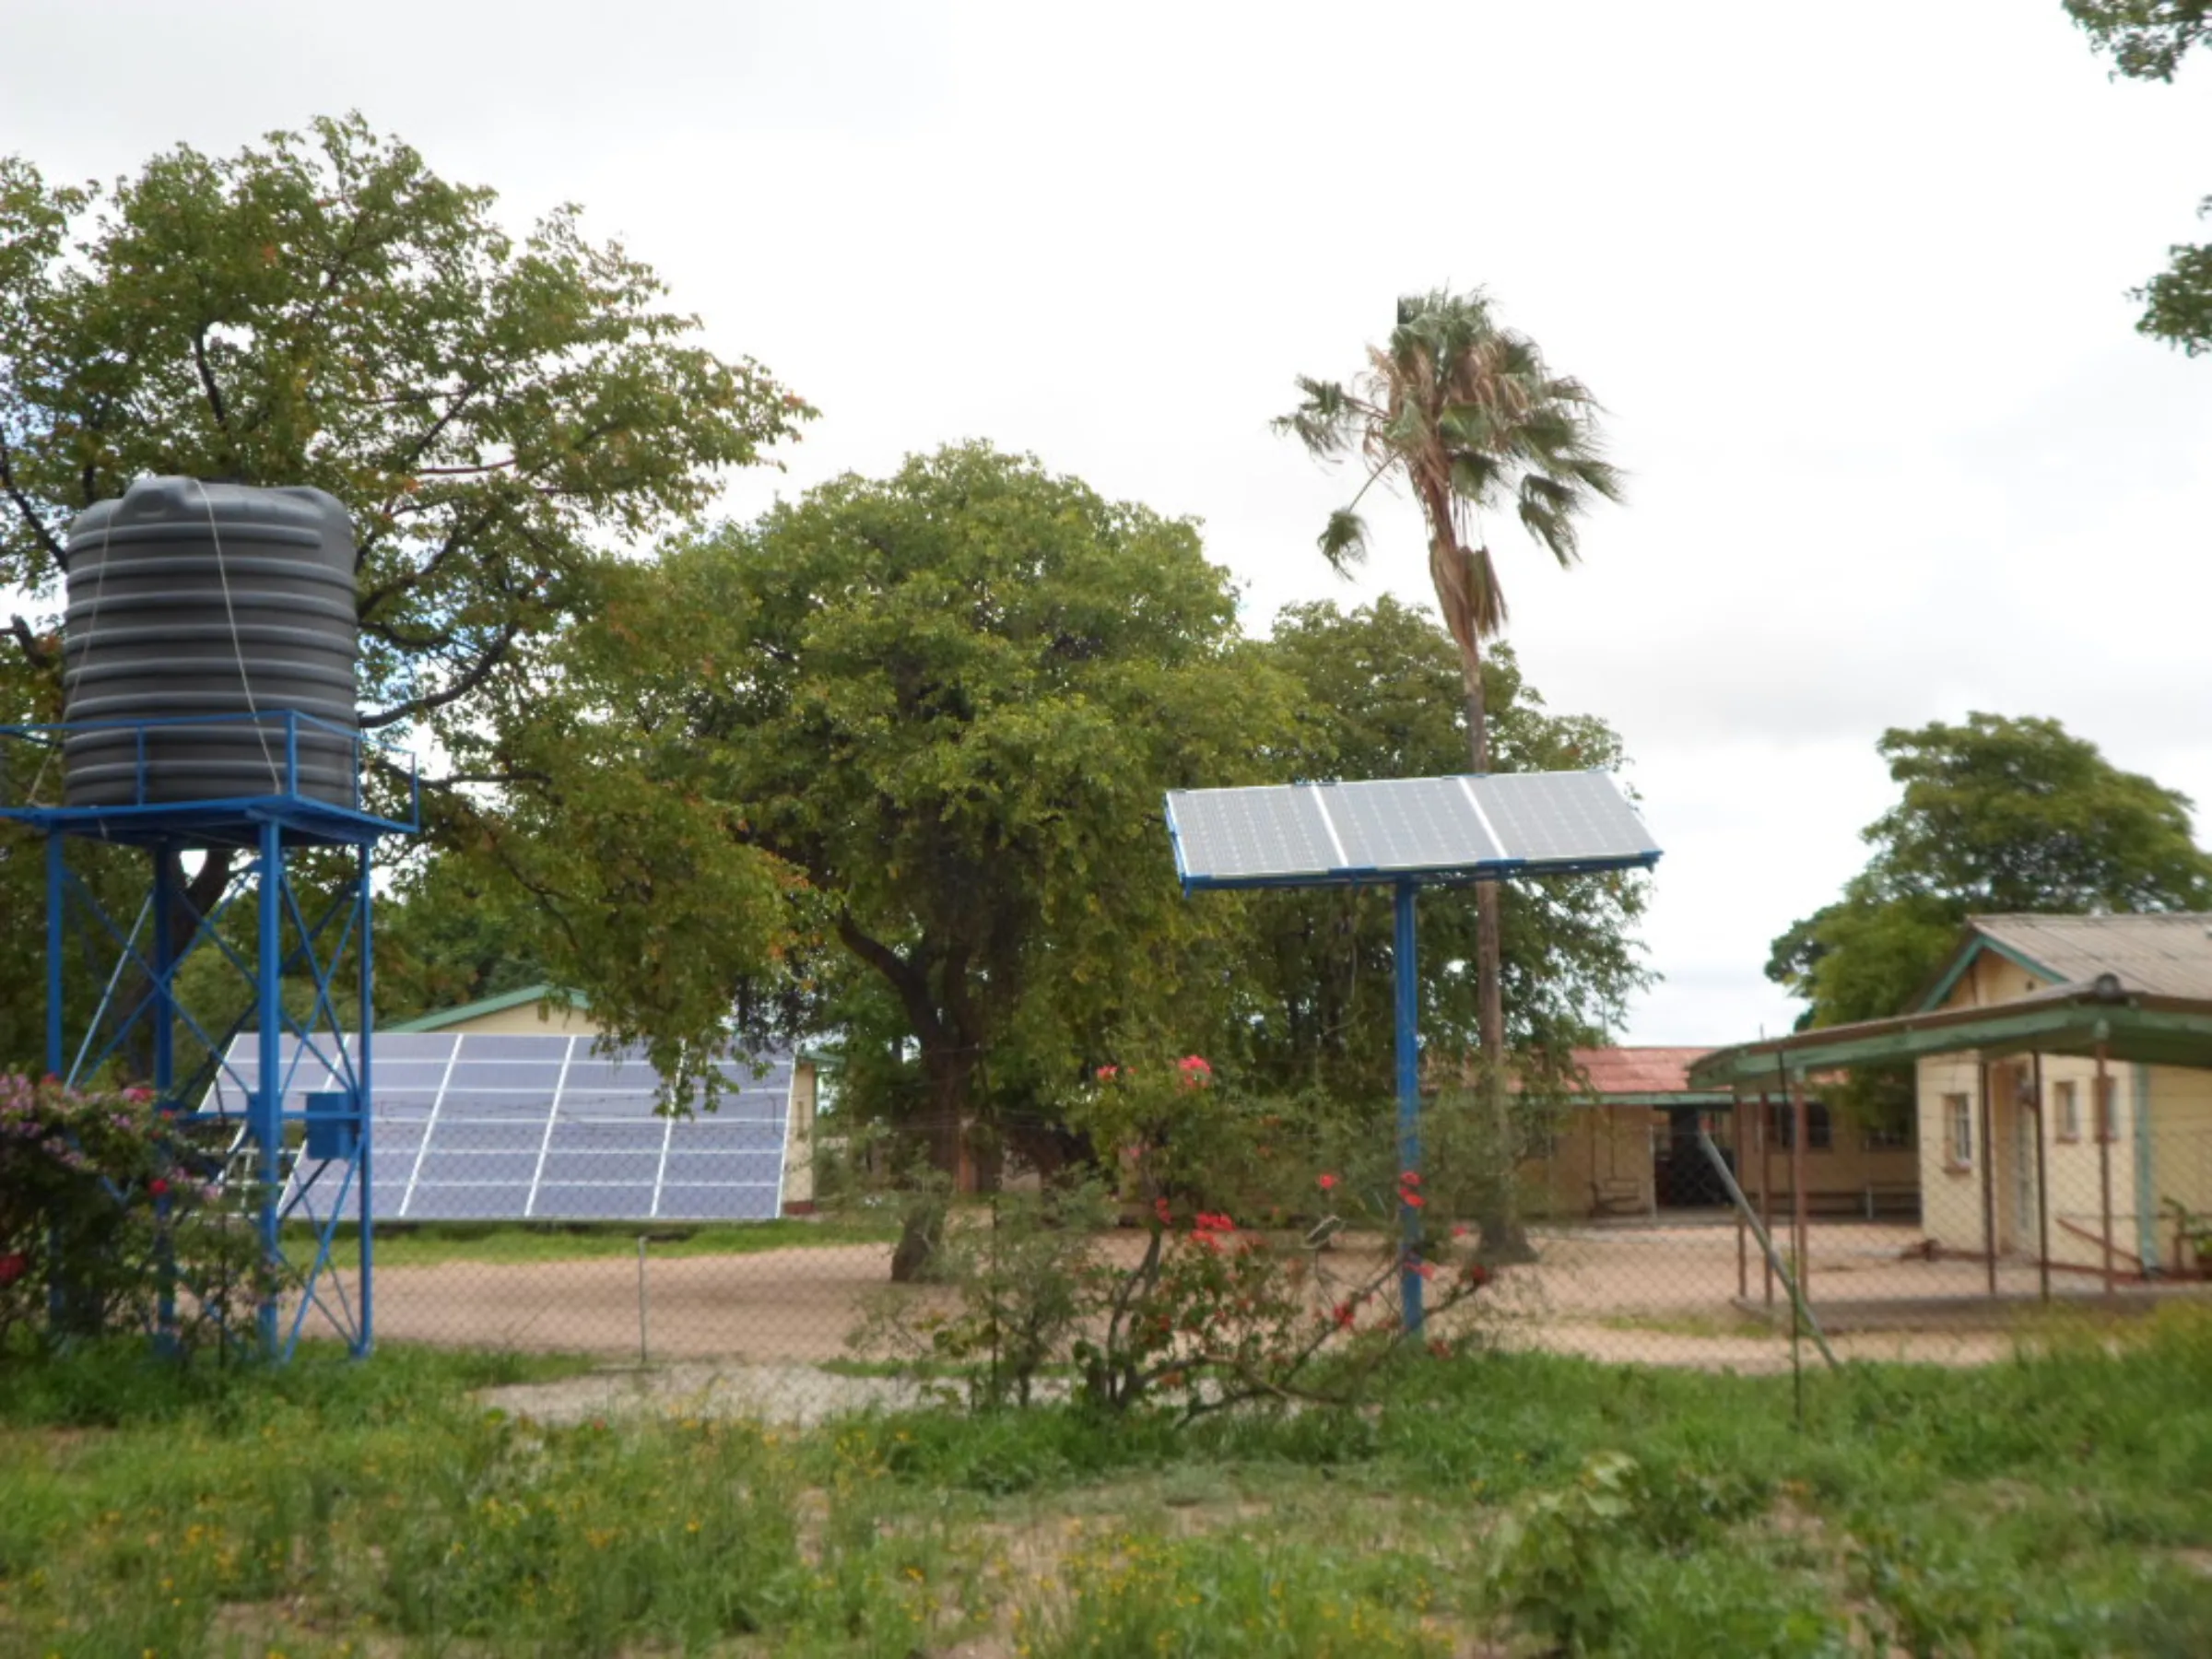 A back-up solar system that keeps a local clinic running in Bulawayo, Zimbabwe, 22 December 2022